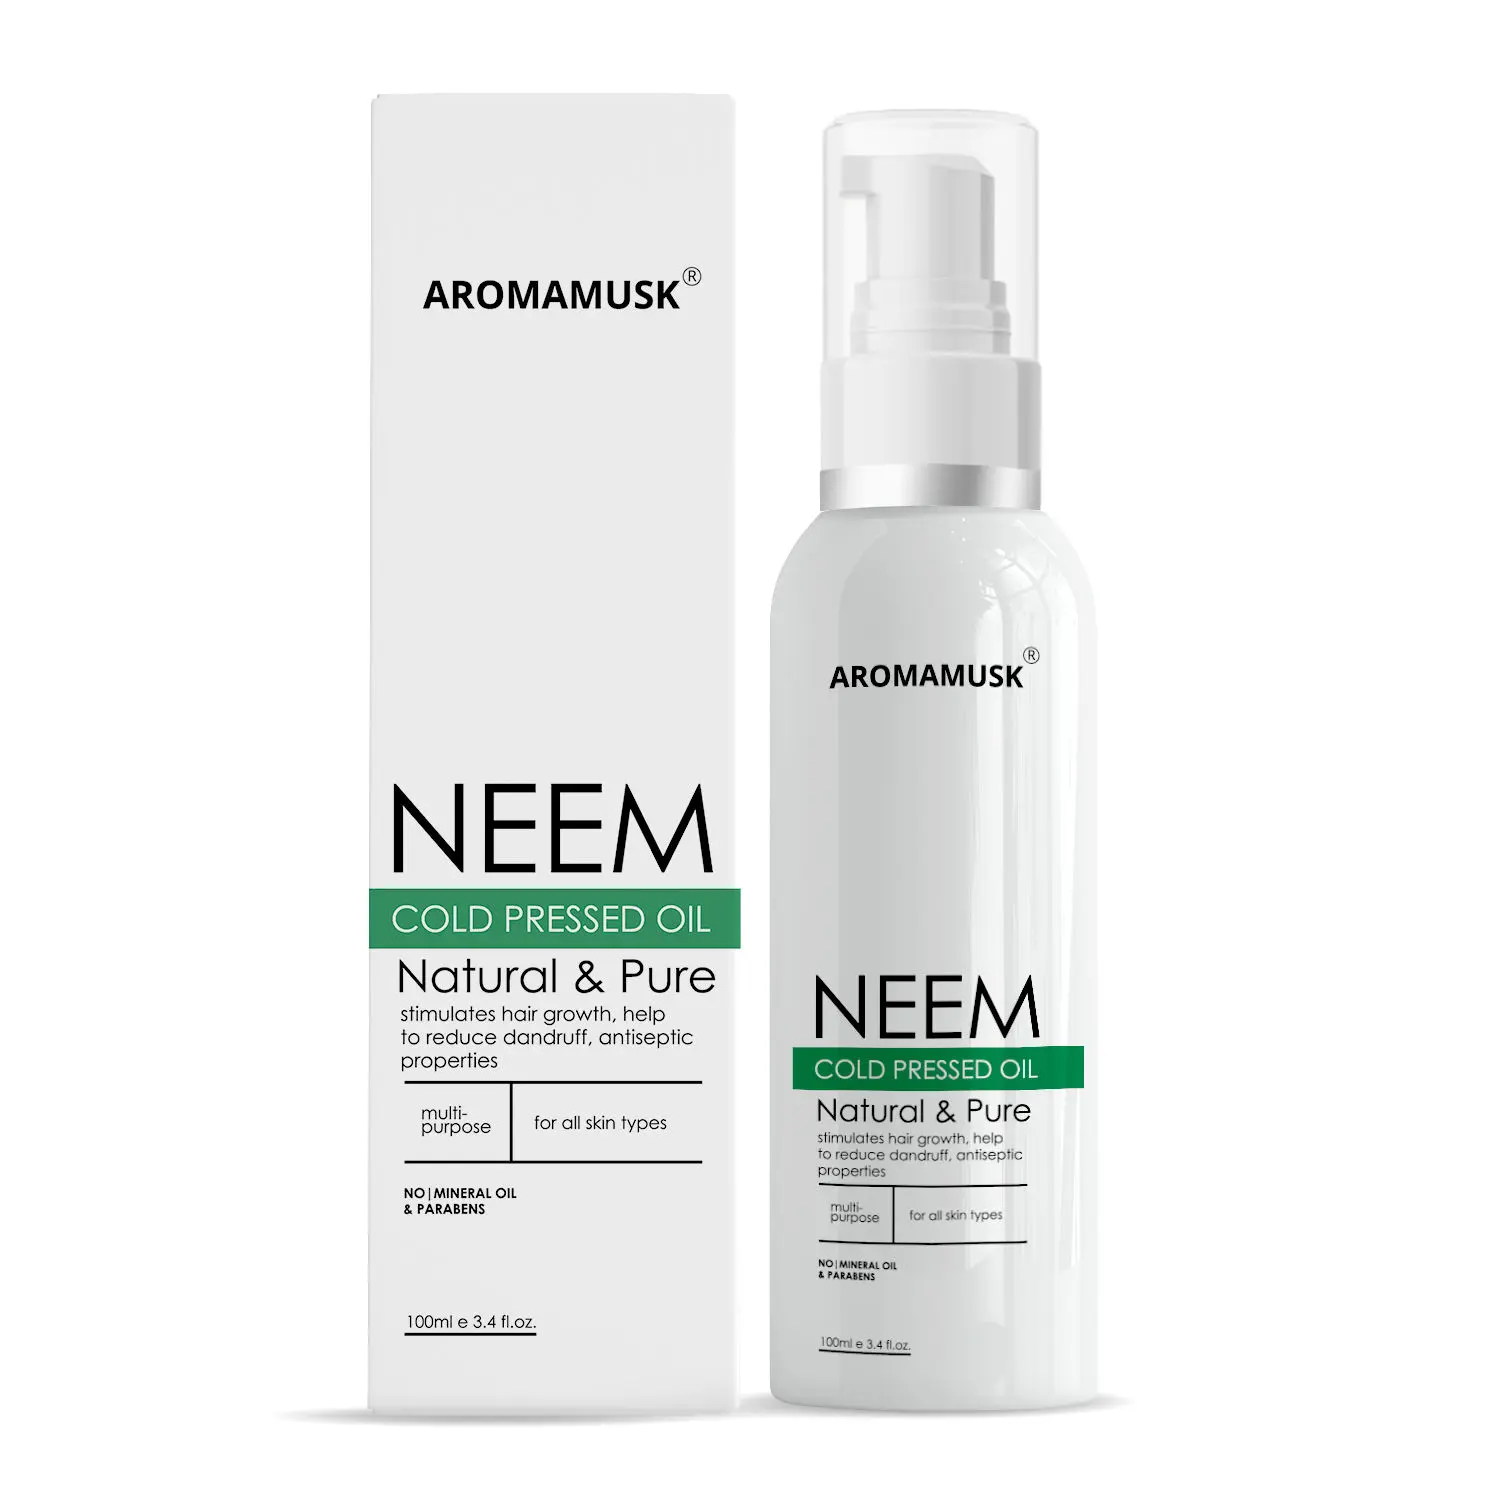 AromaMusk USDA Organic 100% Pure Cold Pressed Neem Oil For Hair, Skin & Nails - Natural Insect Repellent (100 ml)